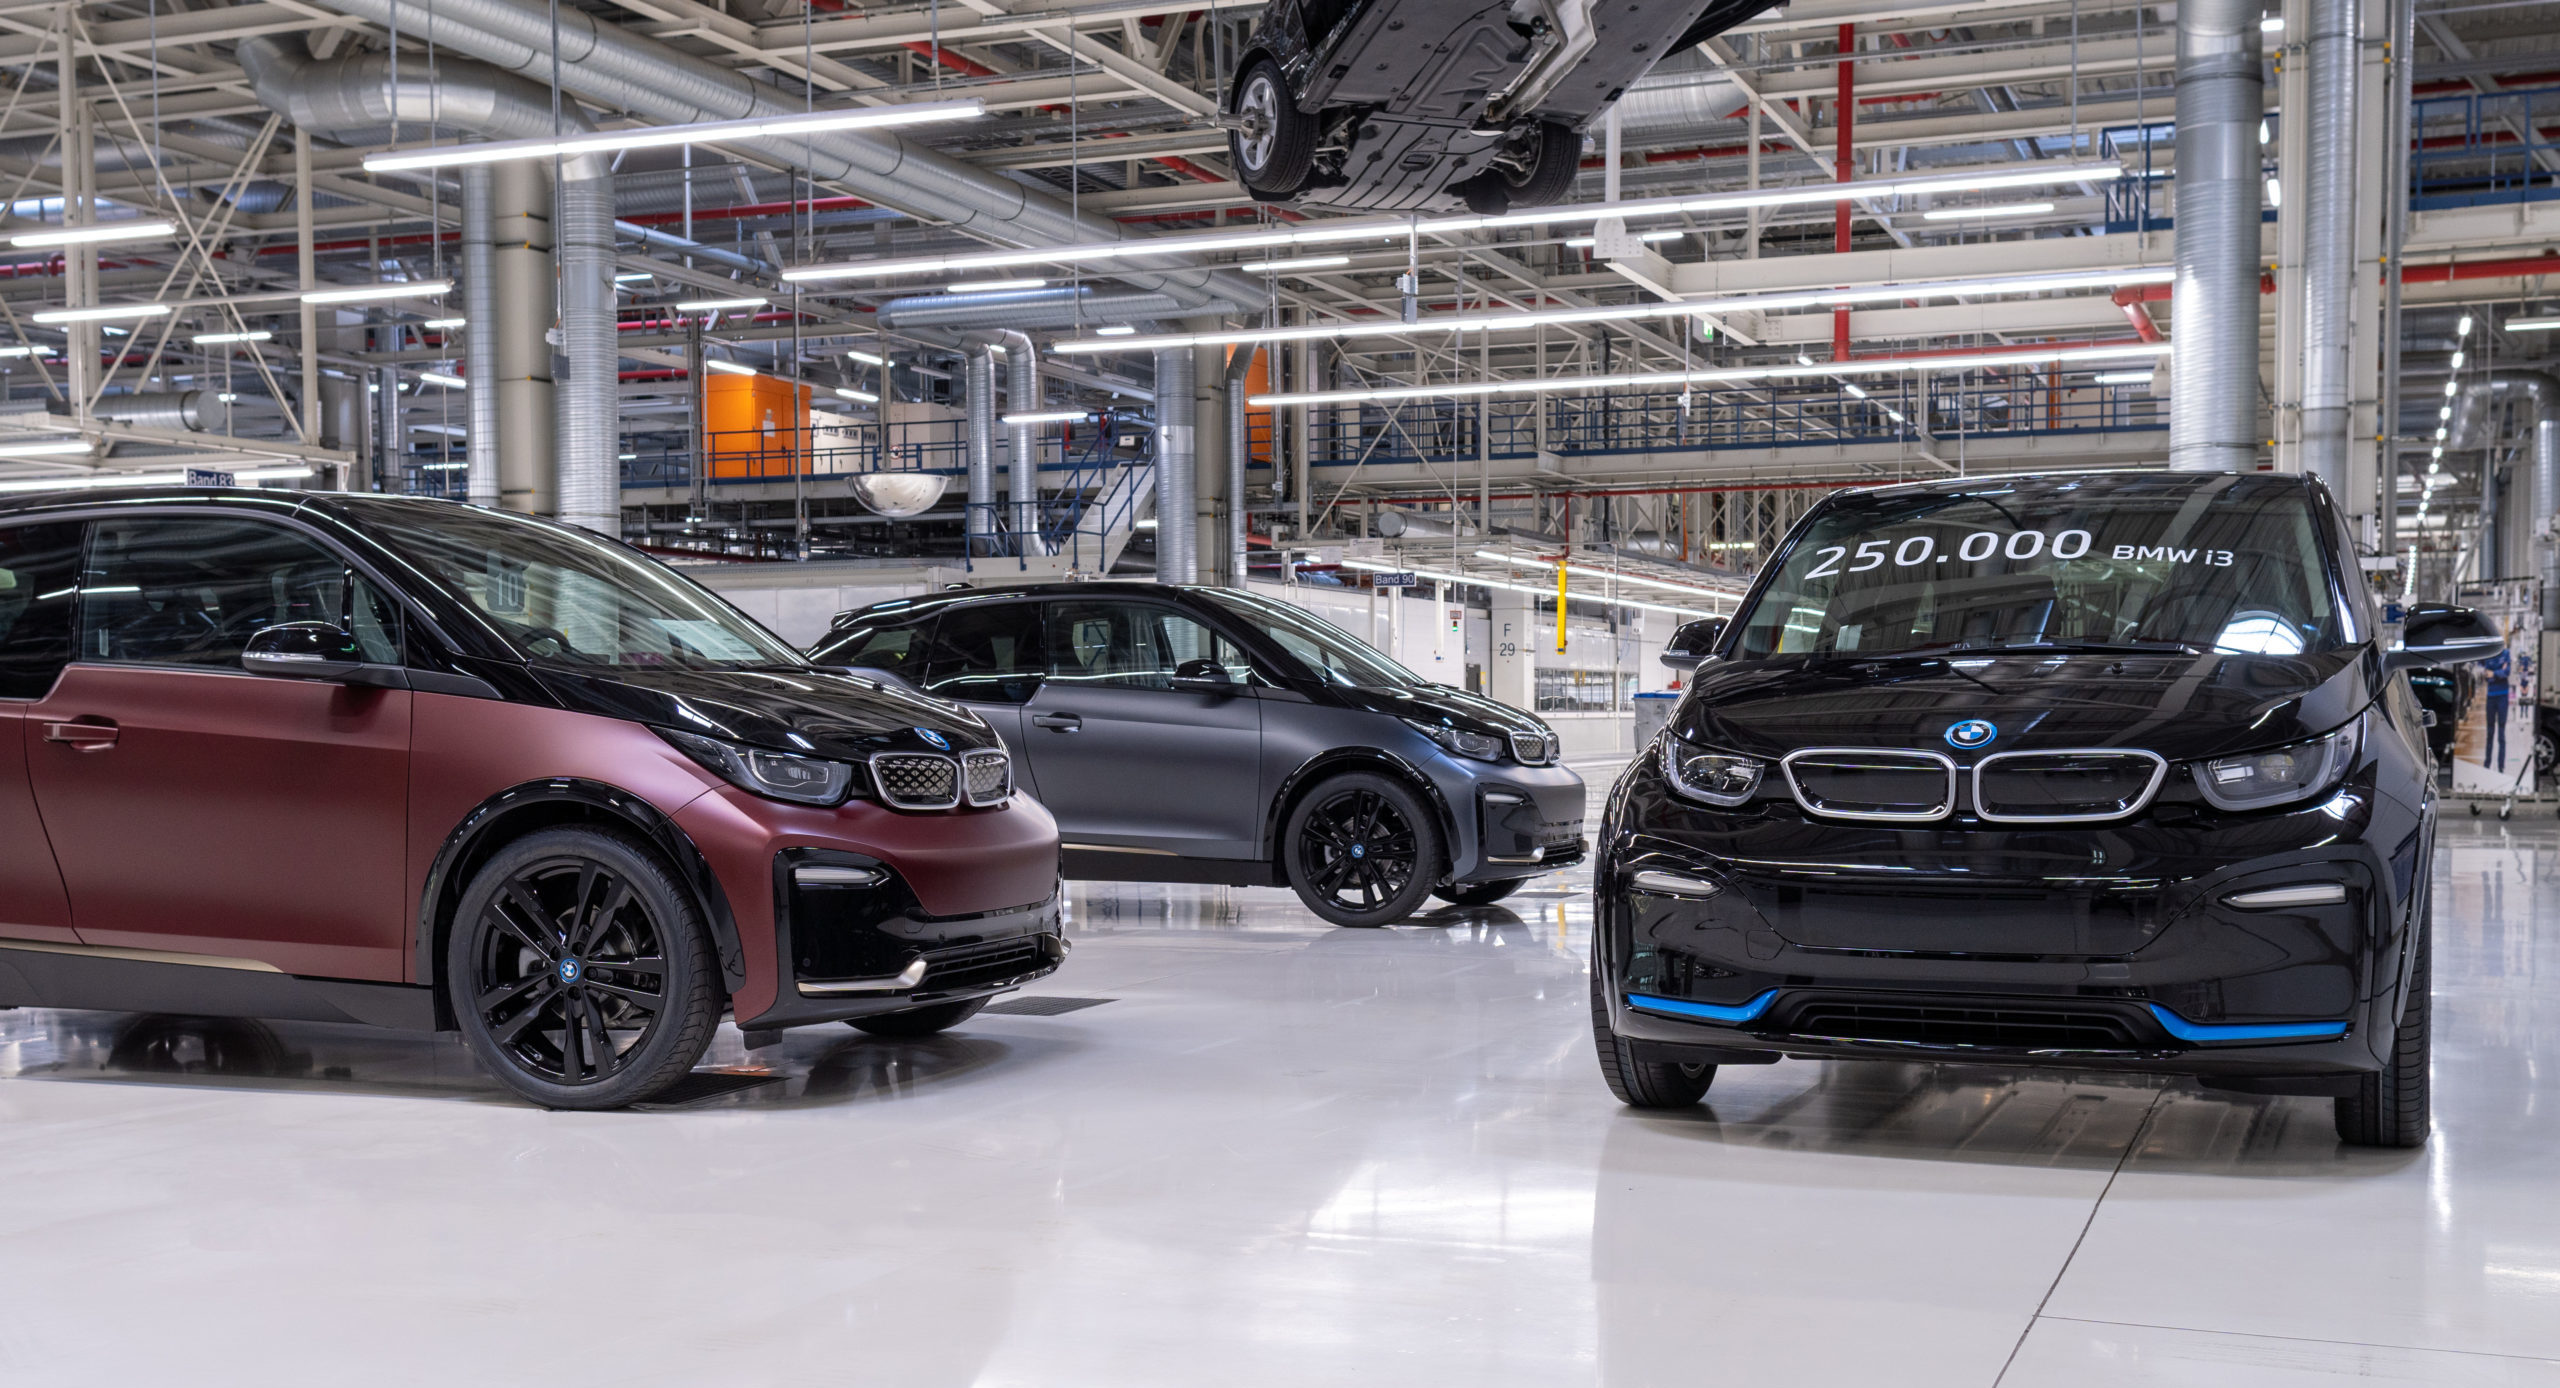 The 250,000th BMW i3 together with the BMW i3s of the HomeRun Edition from the BMW Group Plant Leipzig